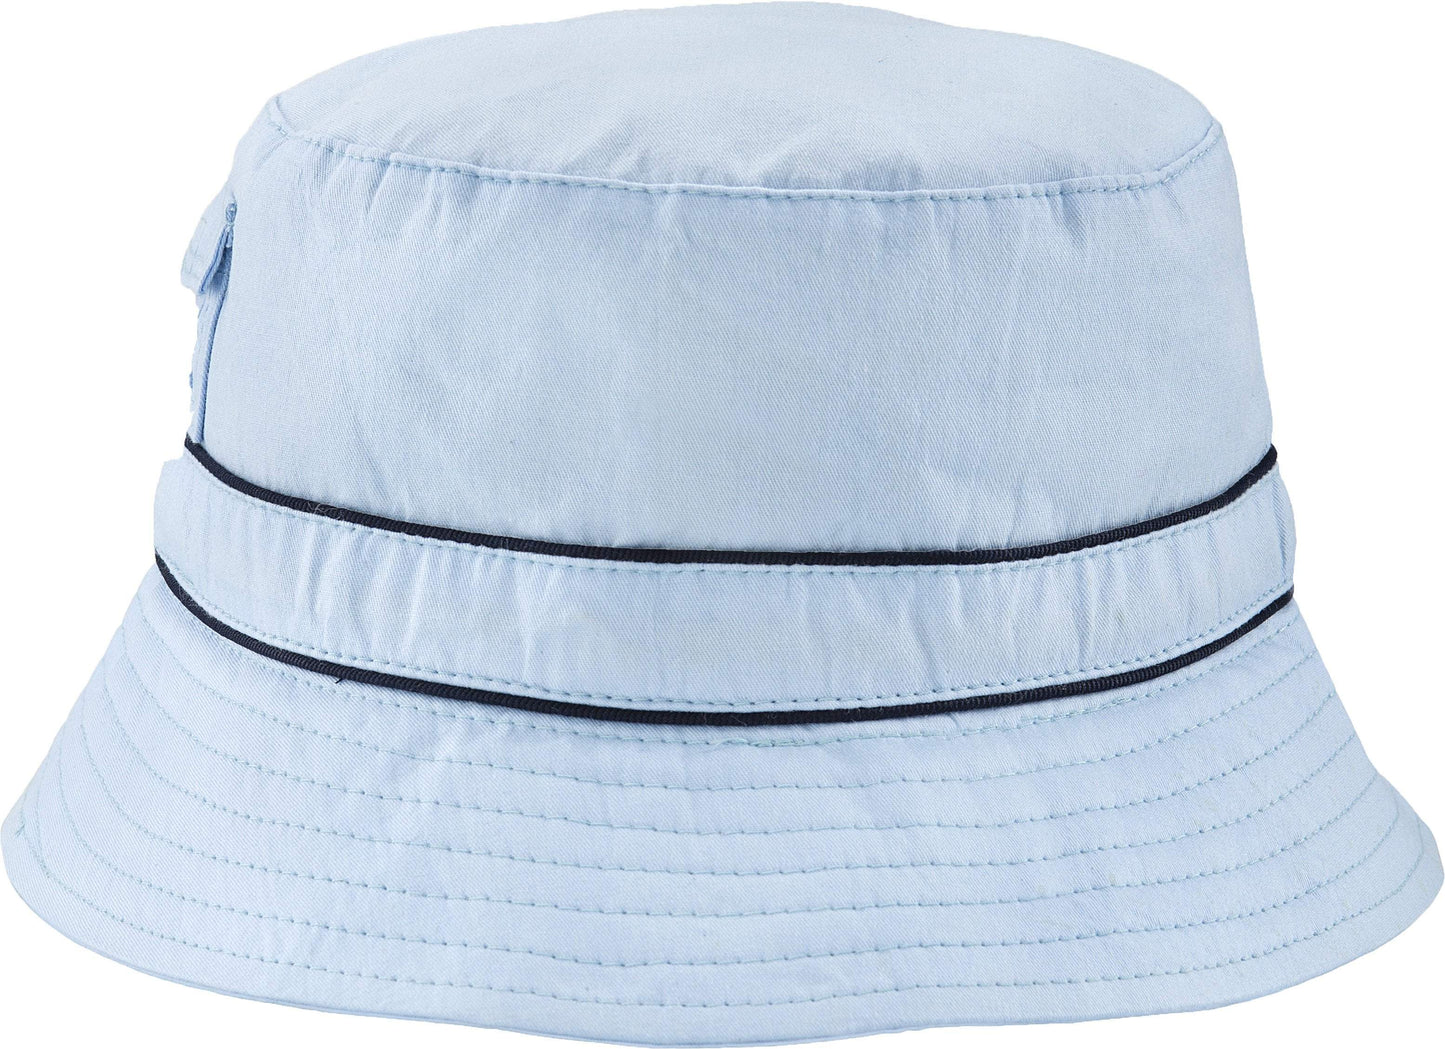 BANZ Sun Hat Childrens Sun Hats with Pocket Small / Blue